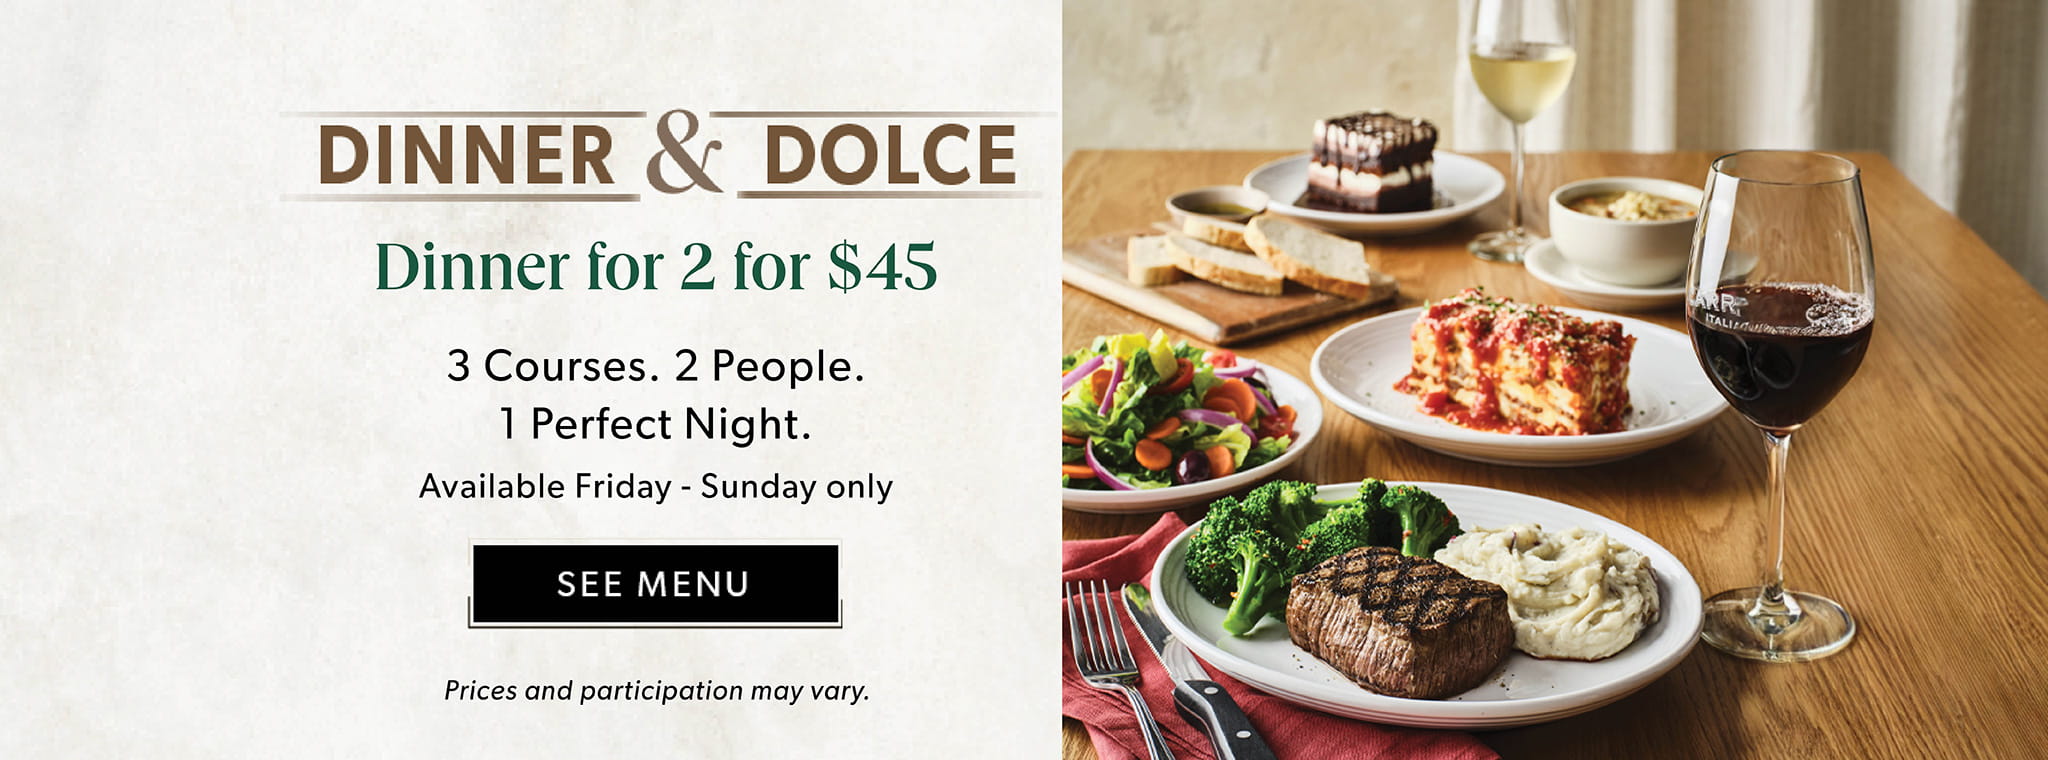 Dinner and Dolce Dinner for 2 for $45 Available Friday - Sunday only